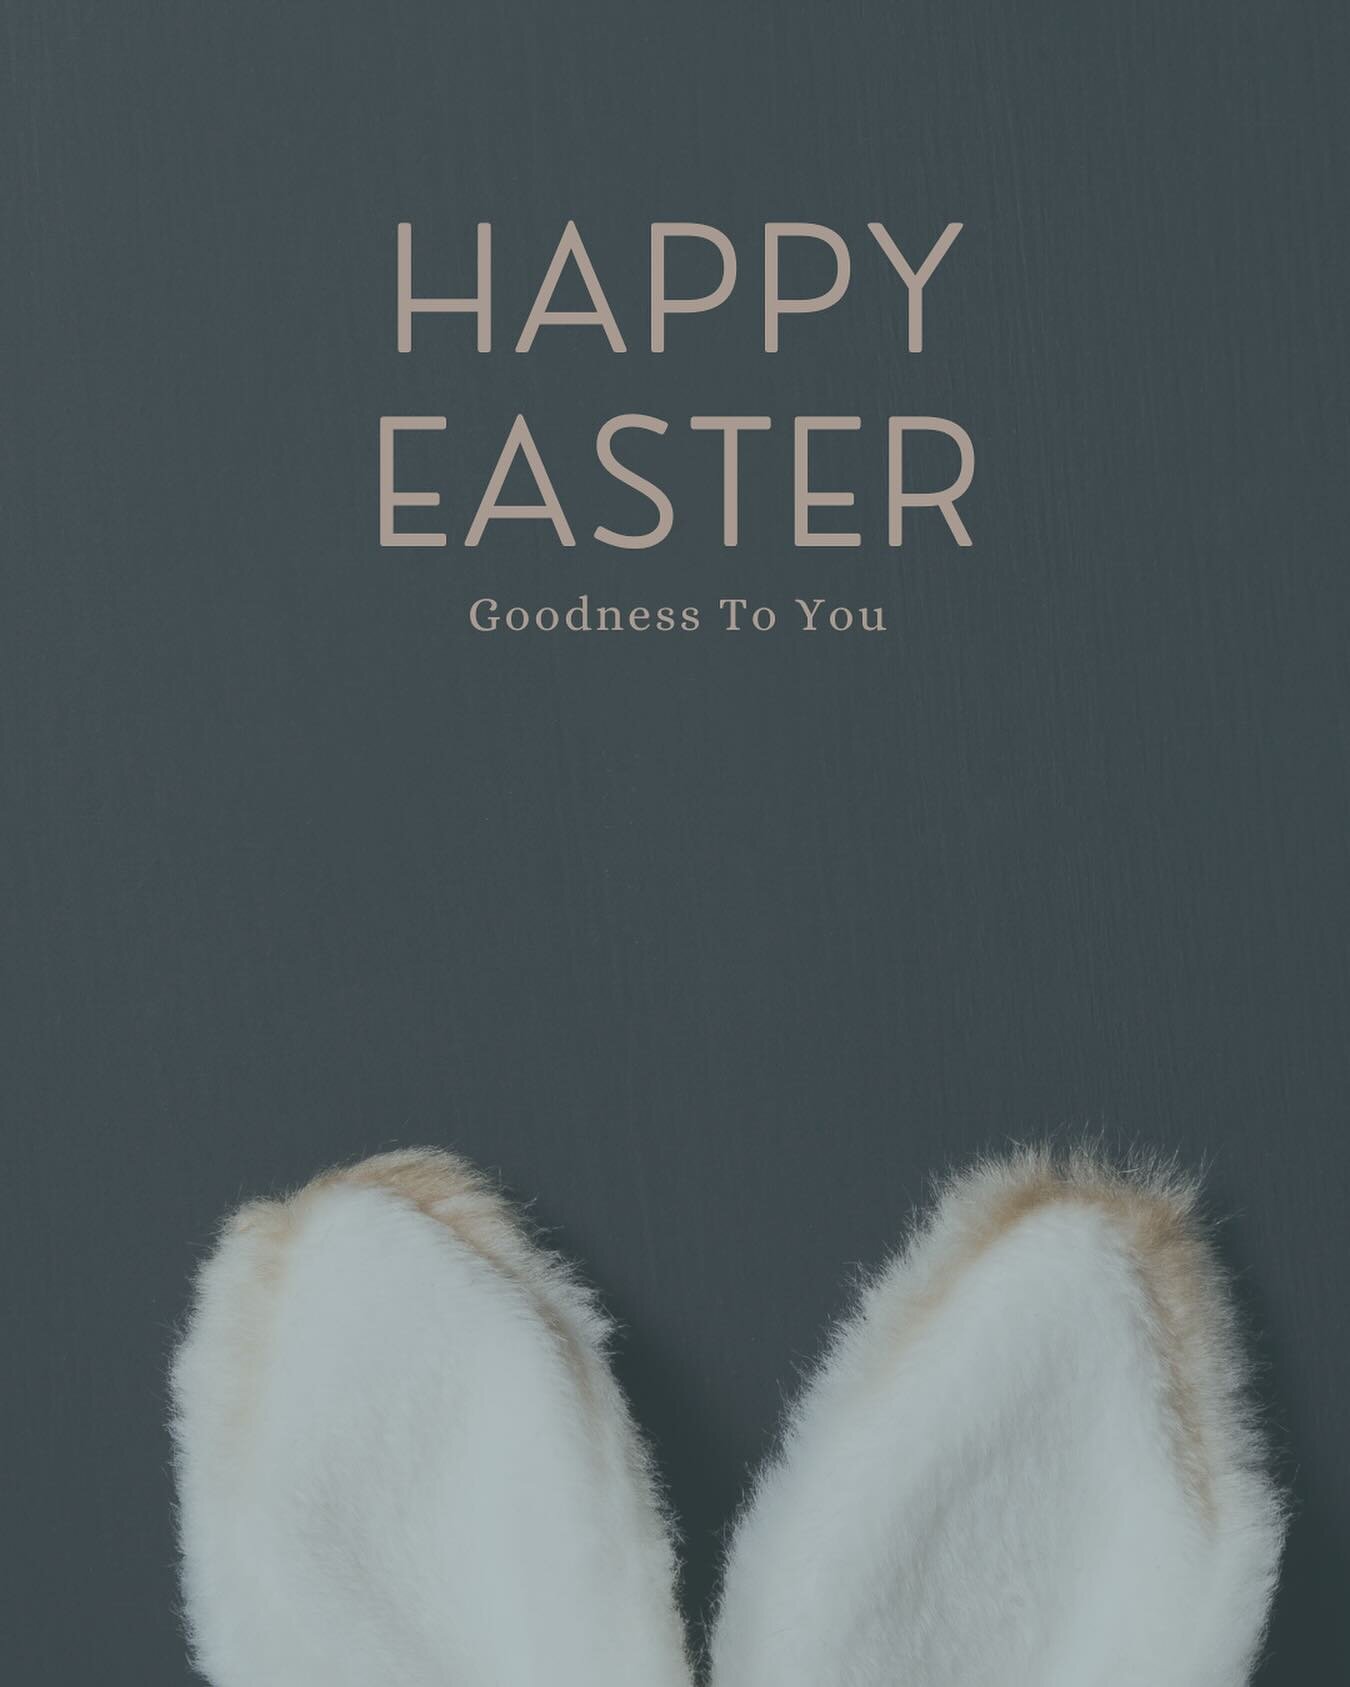 Hoping you are all enjoying the day with family and friends 

#hoppyeaster